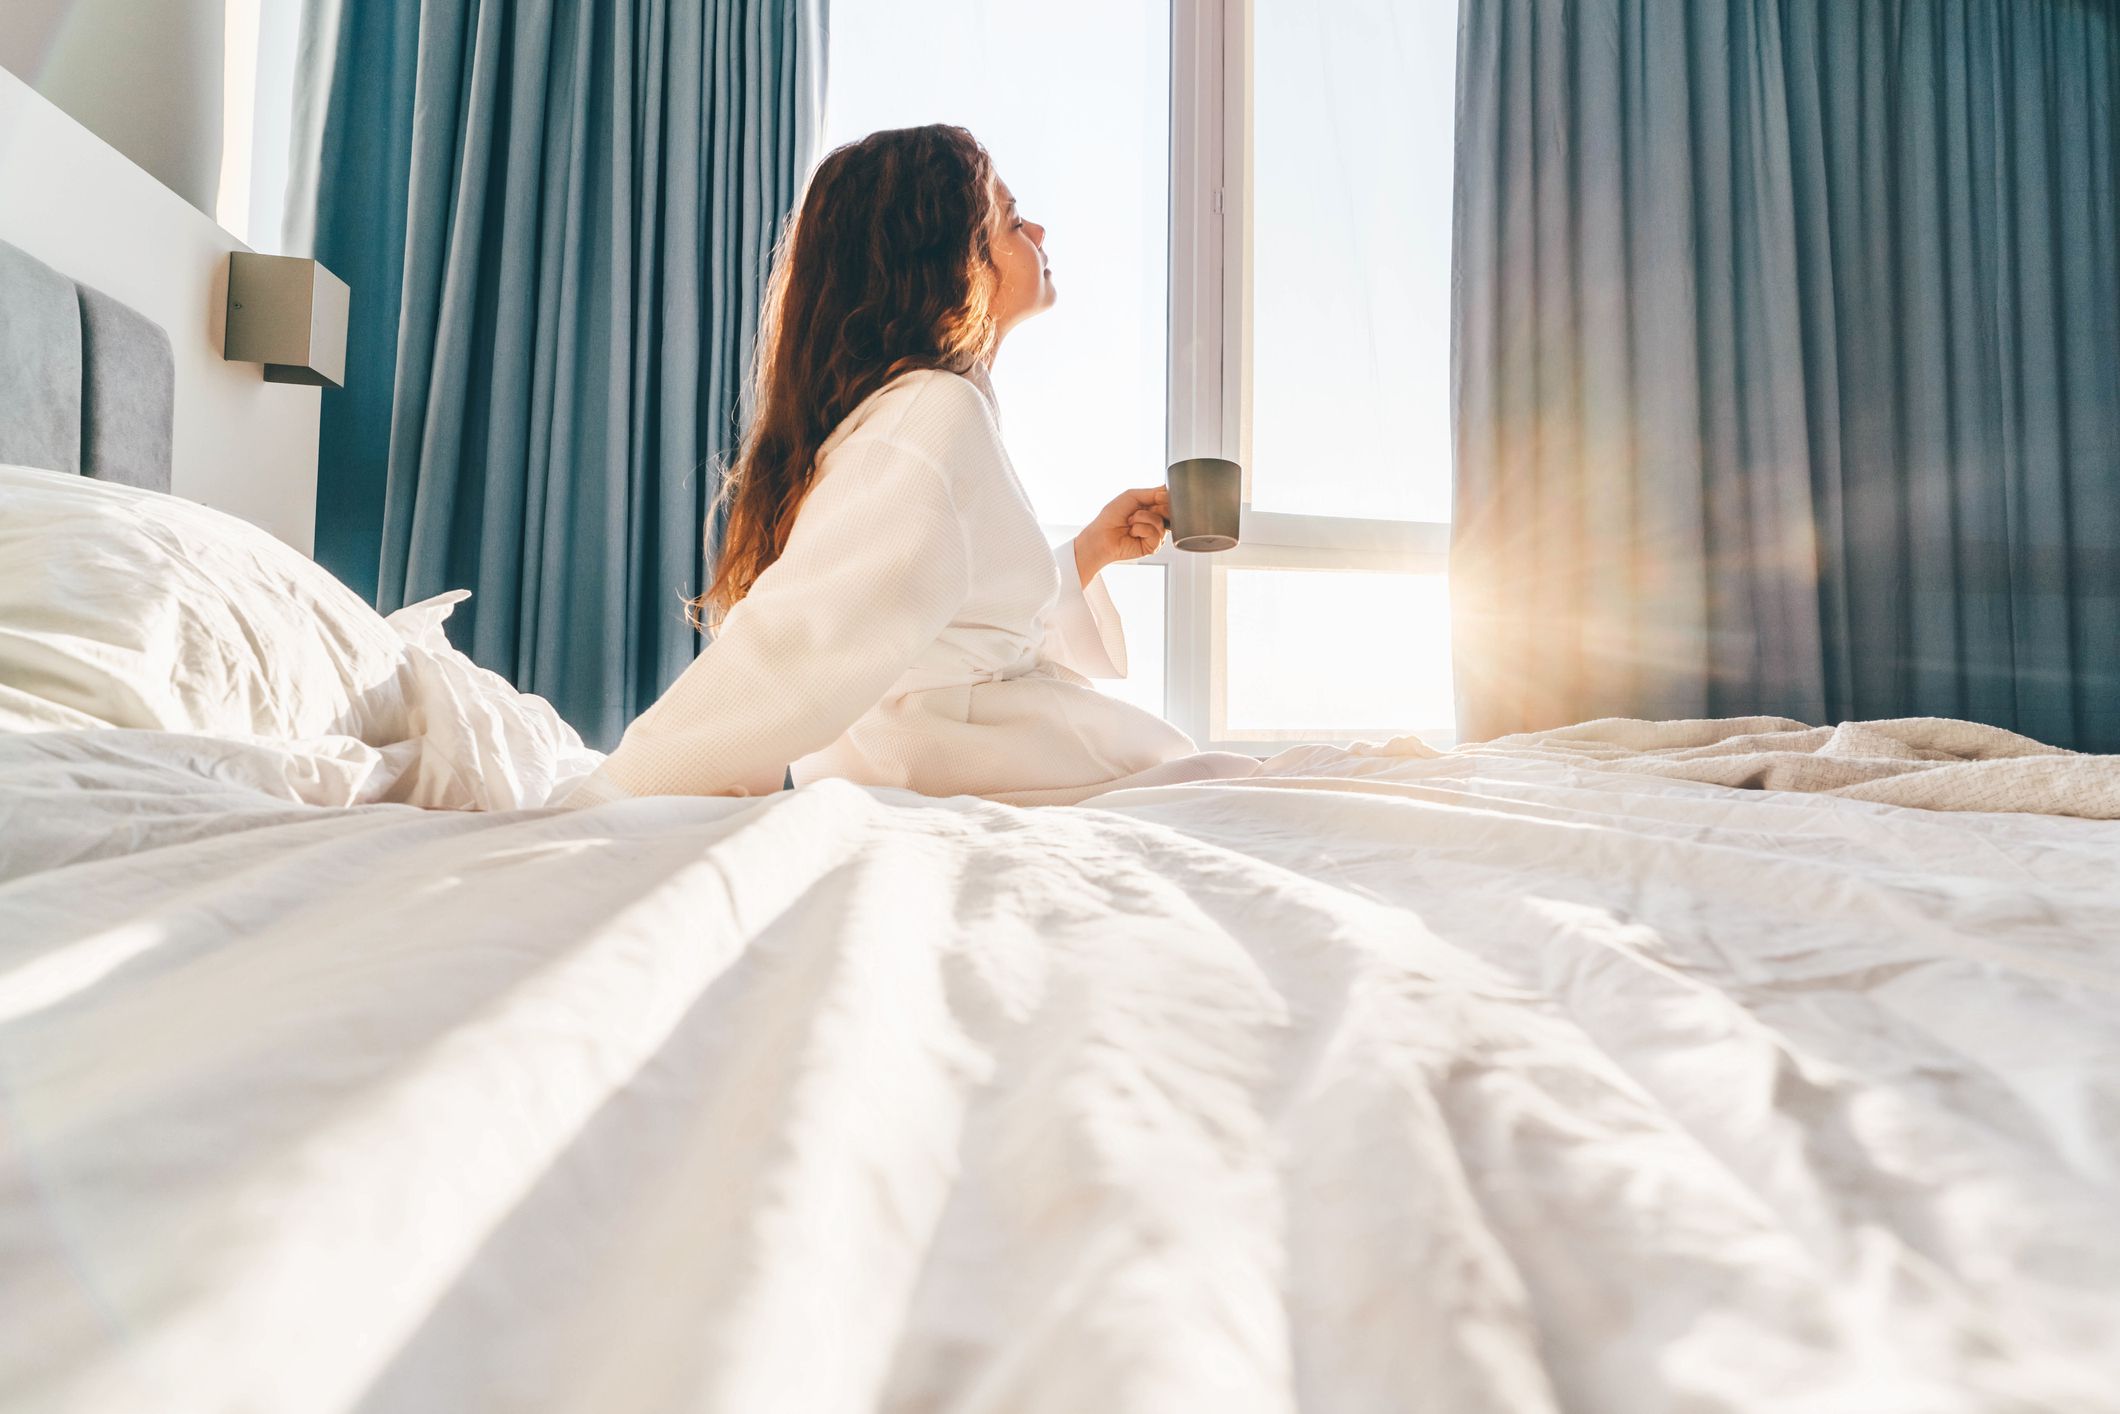 <p>It’s not enough to provide a pillow menu, hotels are taking things a step further to ensure guests get a good night's sleep. A focus not limited to wellness hotels, <a href="https://www.bryte.com/locations">hotel brands</a> like Virgin, Fairmont, Four Seasons and the Park Hyatt in select locations are investing in top-of-the-line mattresses like Bryte, which use artificial intelligence to adjust body support and room temperature to maintain deep sleep. But if you want to sleep even better, Swedish mattress brand Hastens (they make mattresses with hypoallergenic horsehair) has <a href="https://www.cbrboutiquehotel.com/en/">its own boutique hotel</a> in Coimbra, Portugal where they’ve curated the sleep experience from the acoustics insulation to sleep recommendations to ensure you wake up fresh as a daisy. </p>